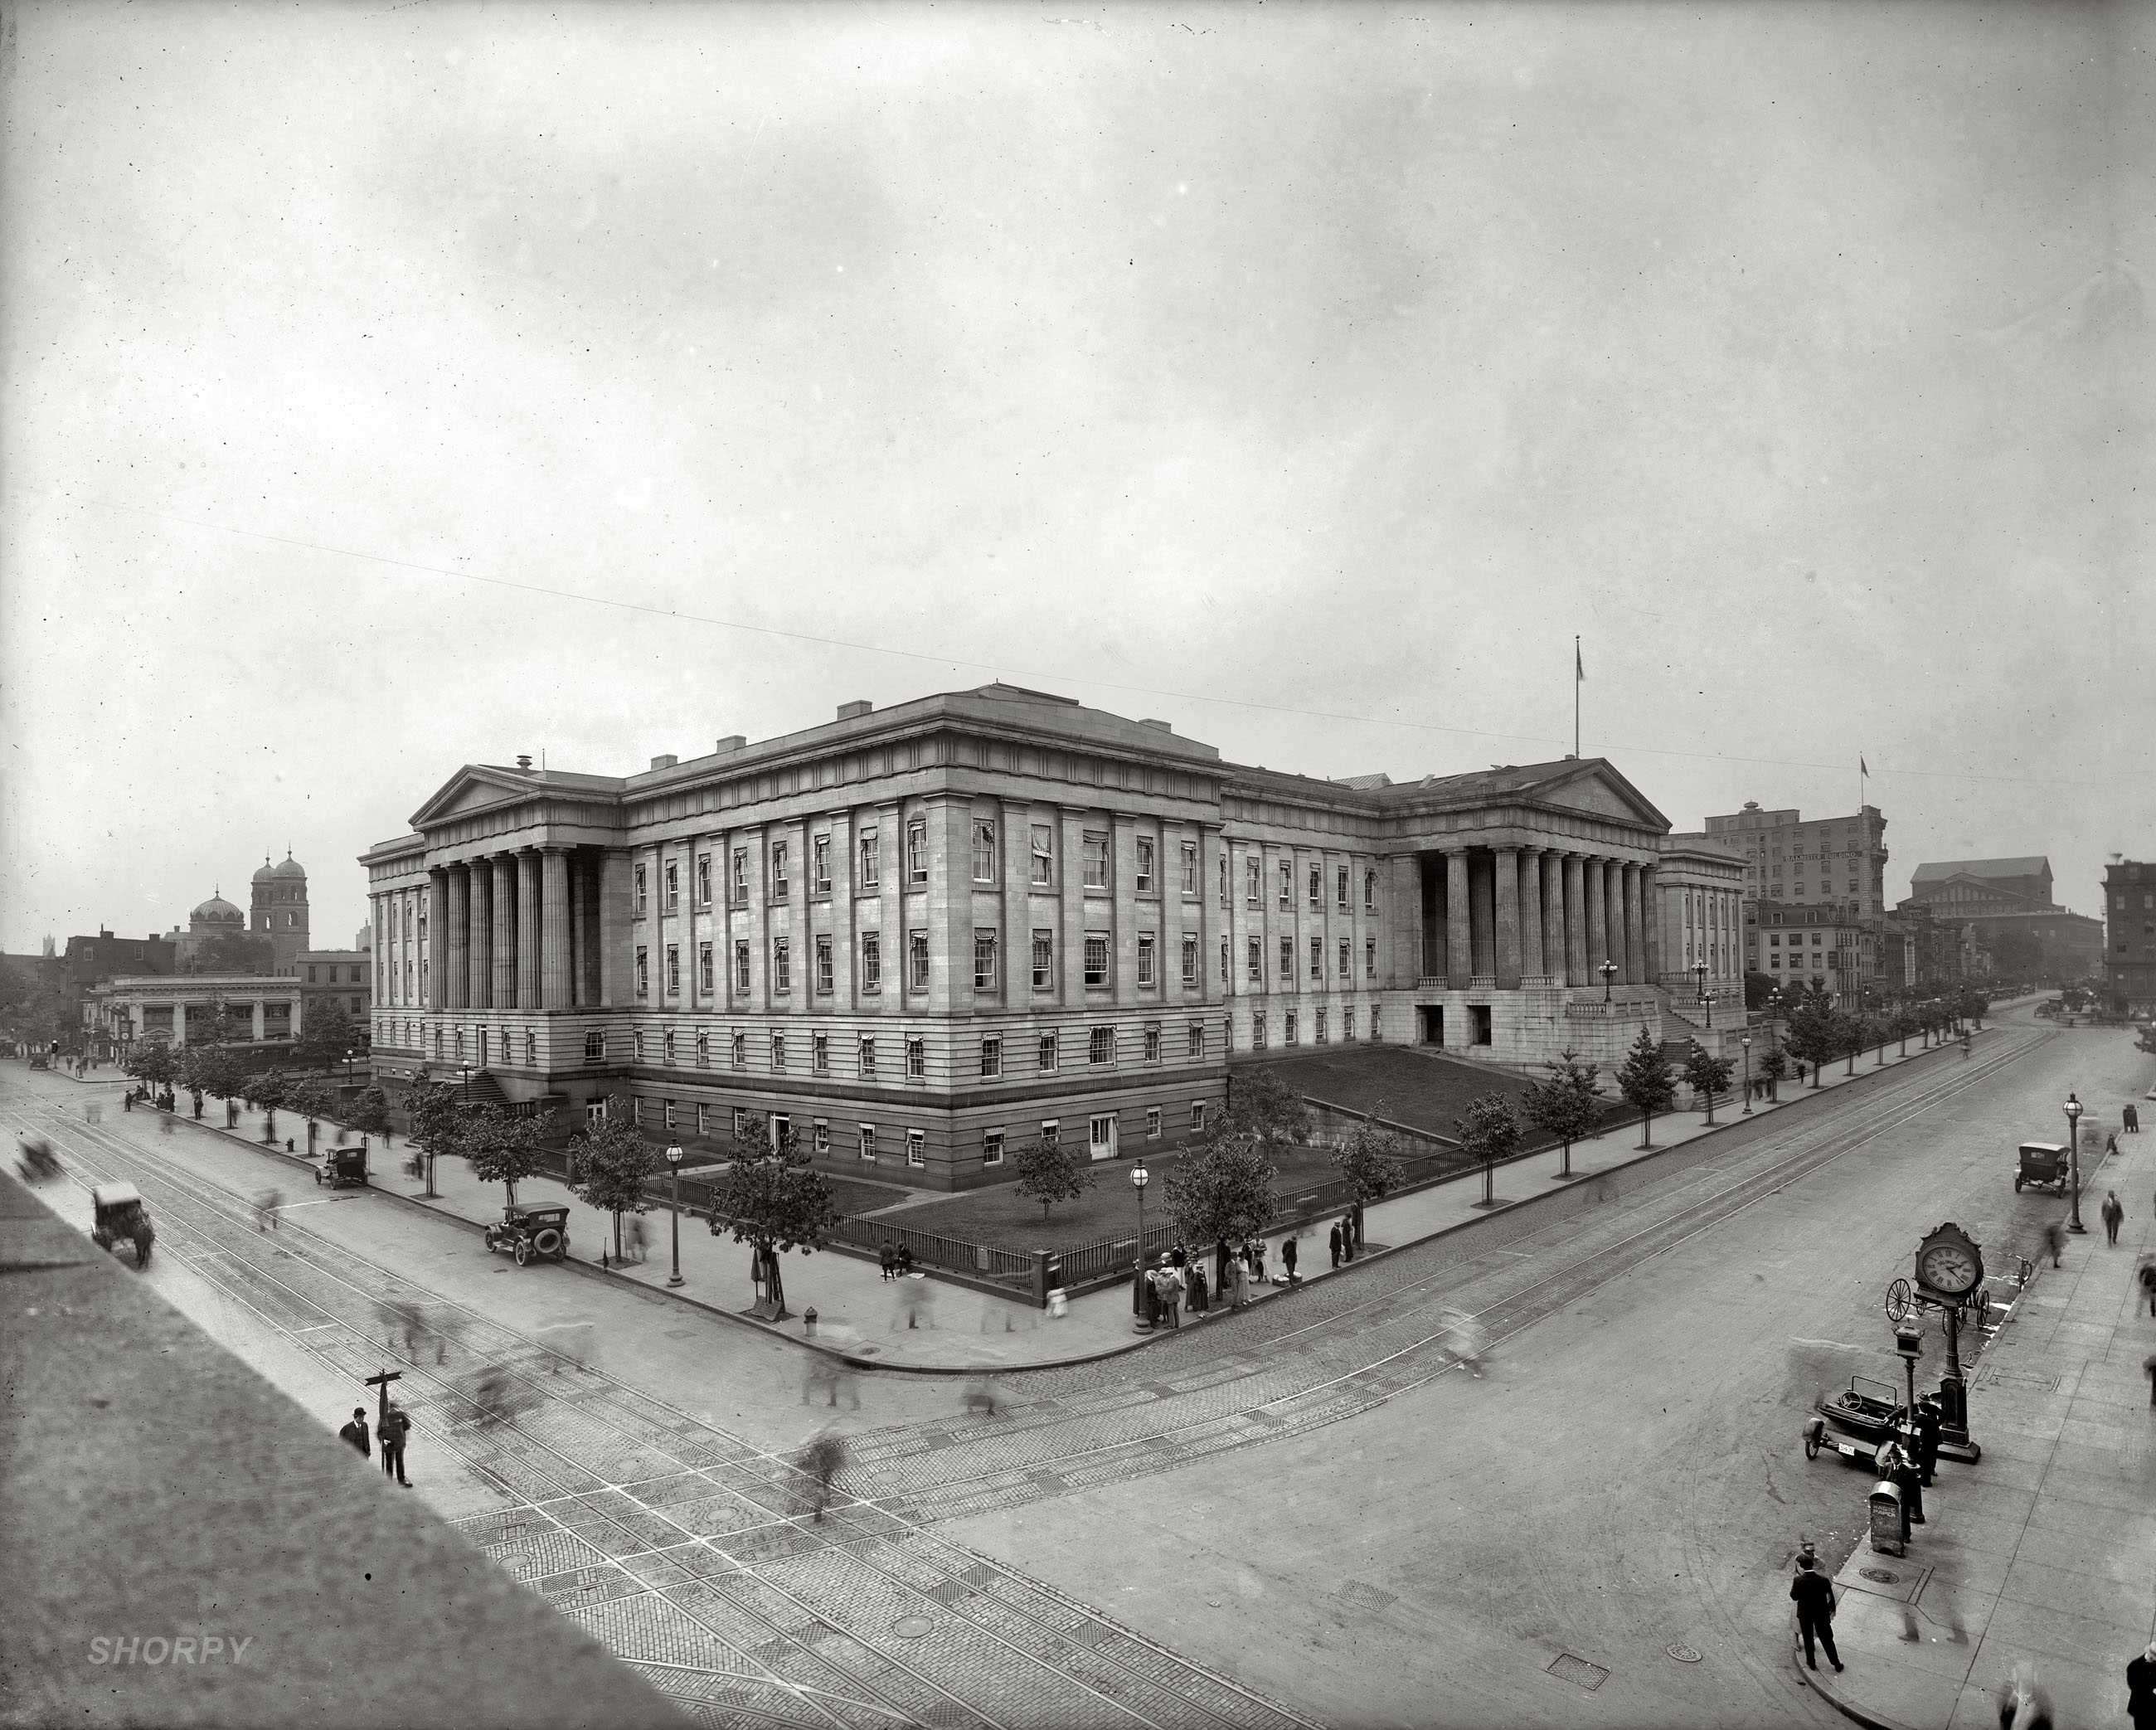 The U.S. Patent and Trademark Office in Washington circa 1920. Which, after a zillion-dollar makeover, is now the Smithsonian's National Portrait Gallery and Museum of American Art. National Photo Co. glass negative. View full size.